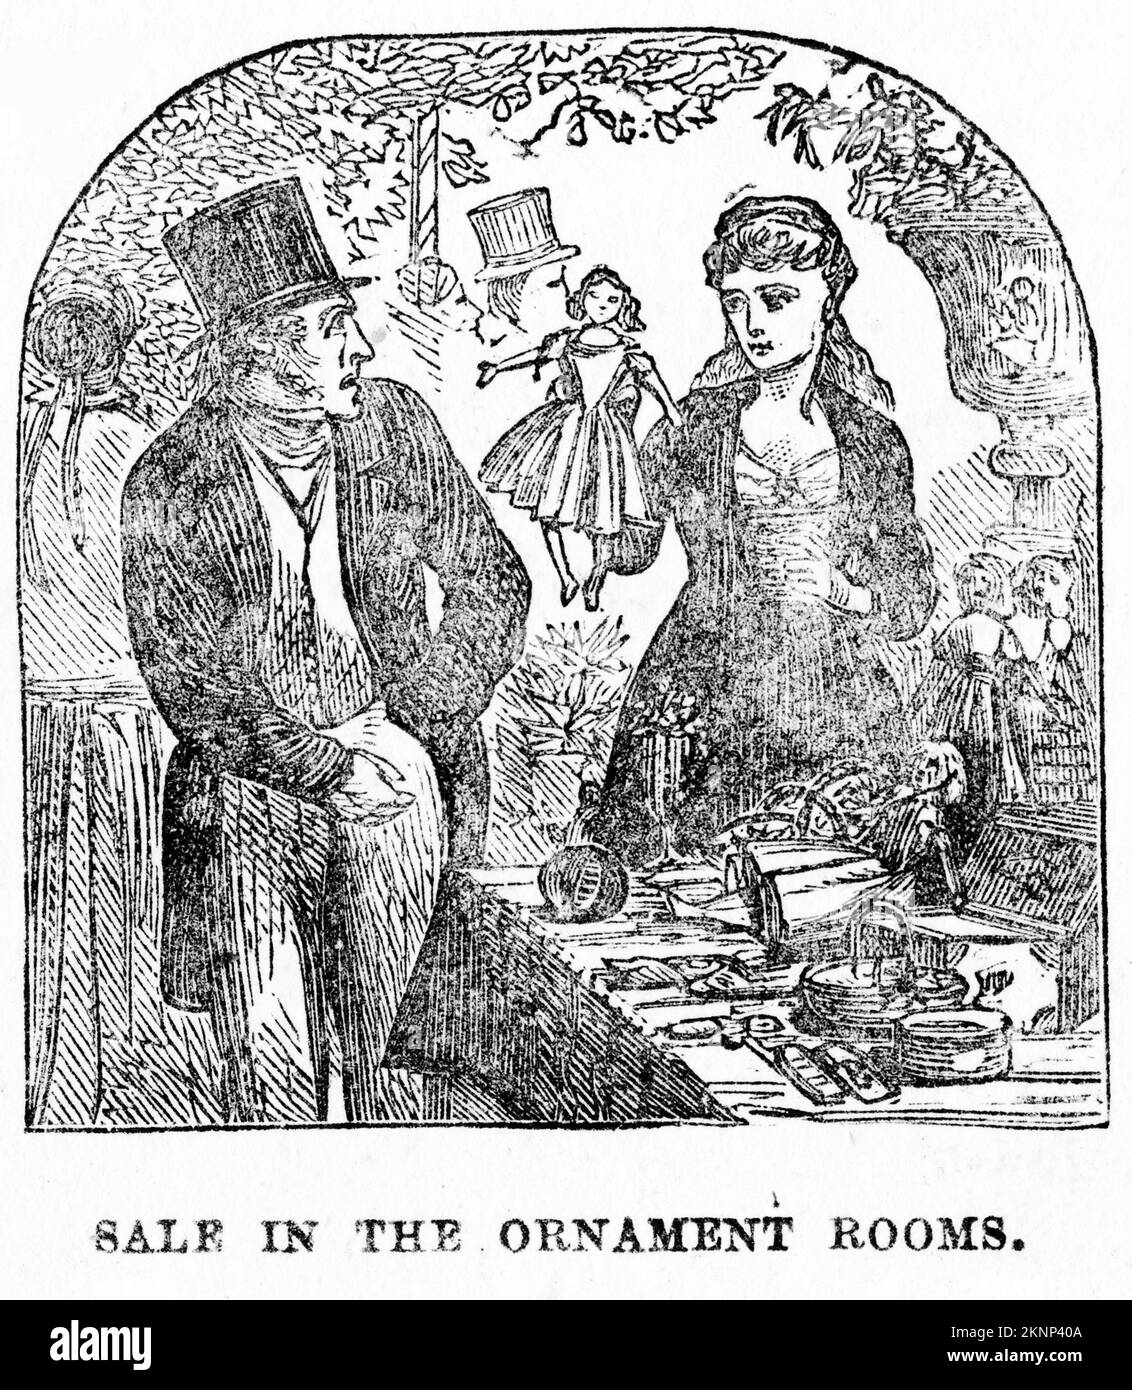 Engraving of a man buying ornaments from the nunnery, from the Awful Disclosures of Maria Monk, circa 1890 Stock Photo